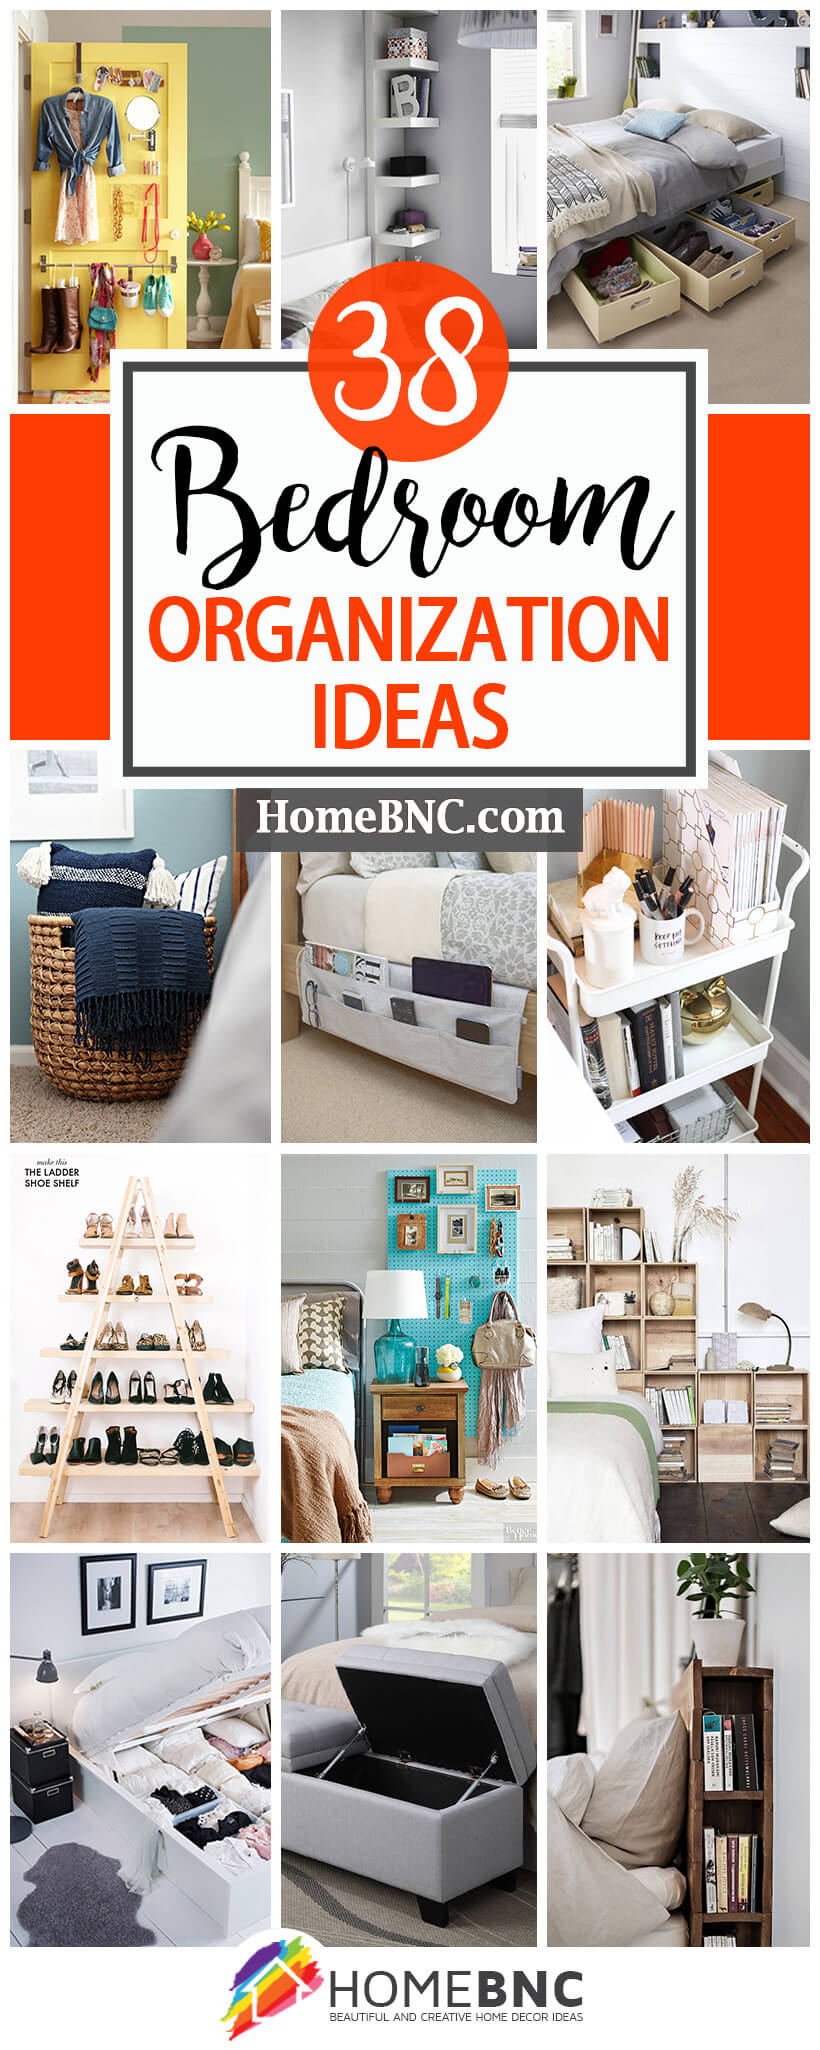 20 Best Bedroom Organization Ideas and Projects for 20